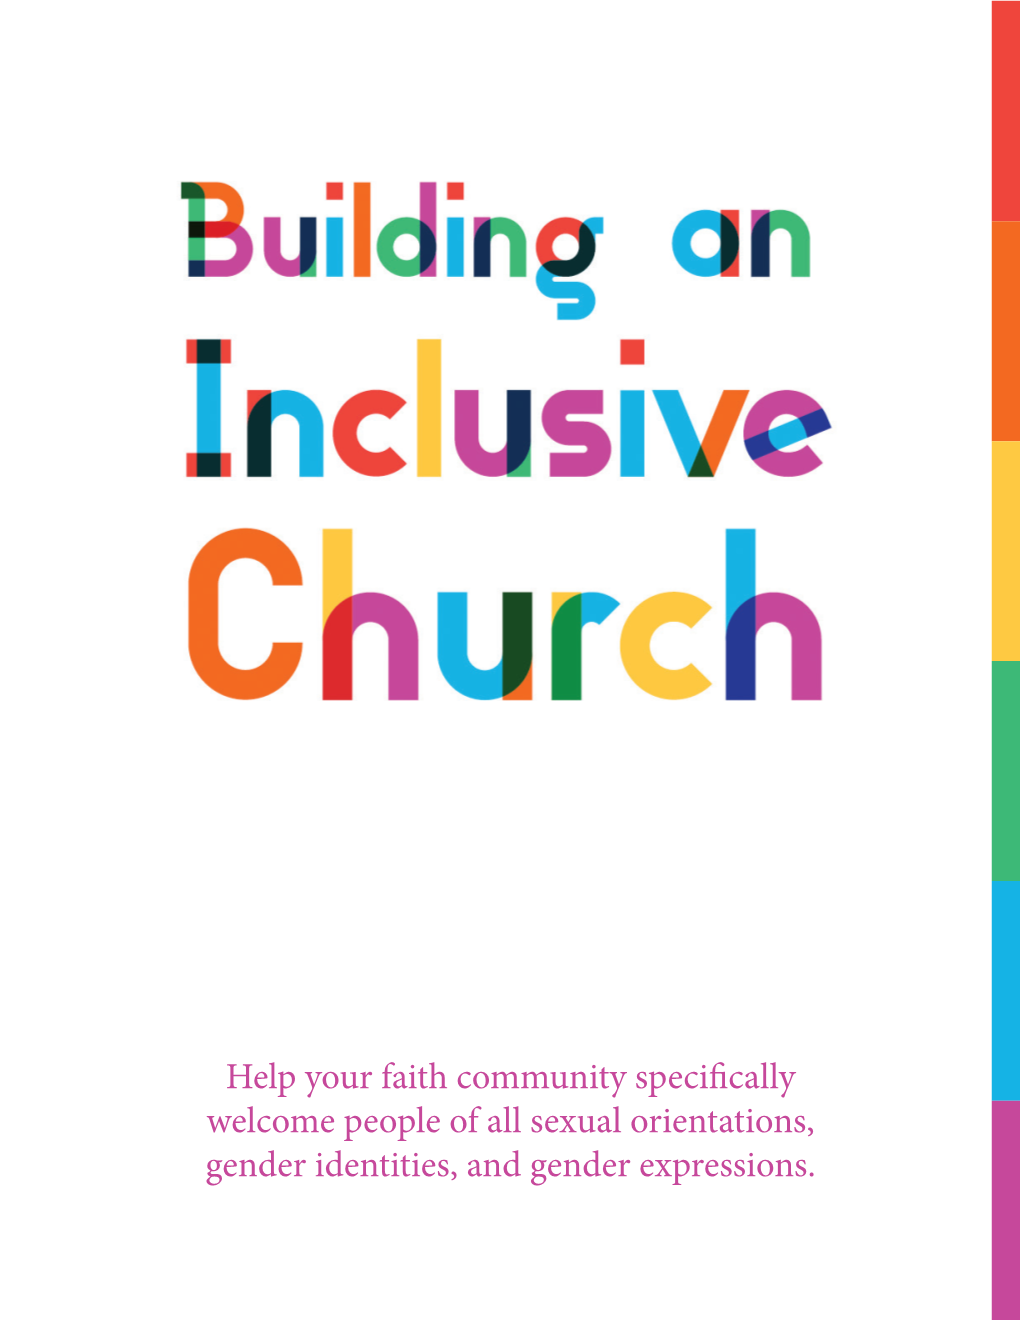 Help Your Faith Community Specifically Welcome People of All Sexual Orientations, Gender Identities, and Gender Expressions